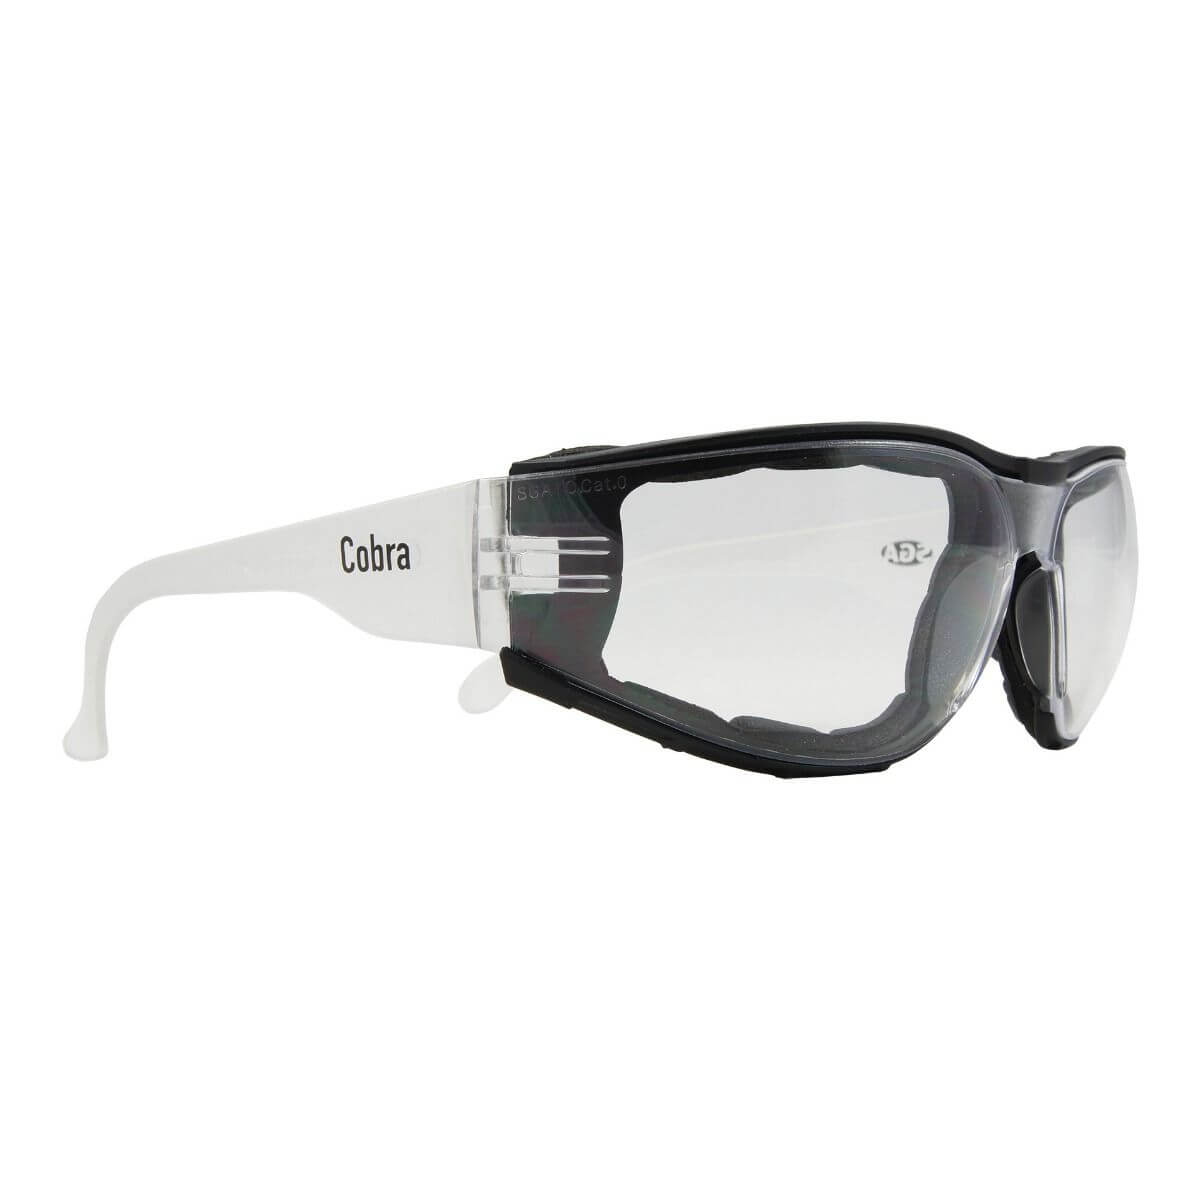 Cobra Positive Seal Safety Glasses - Clear